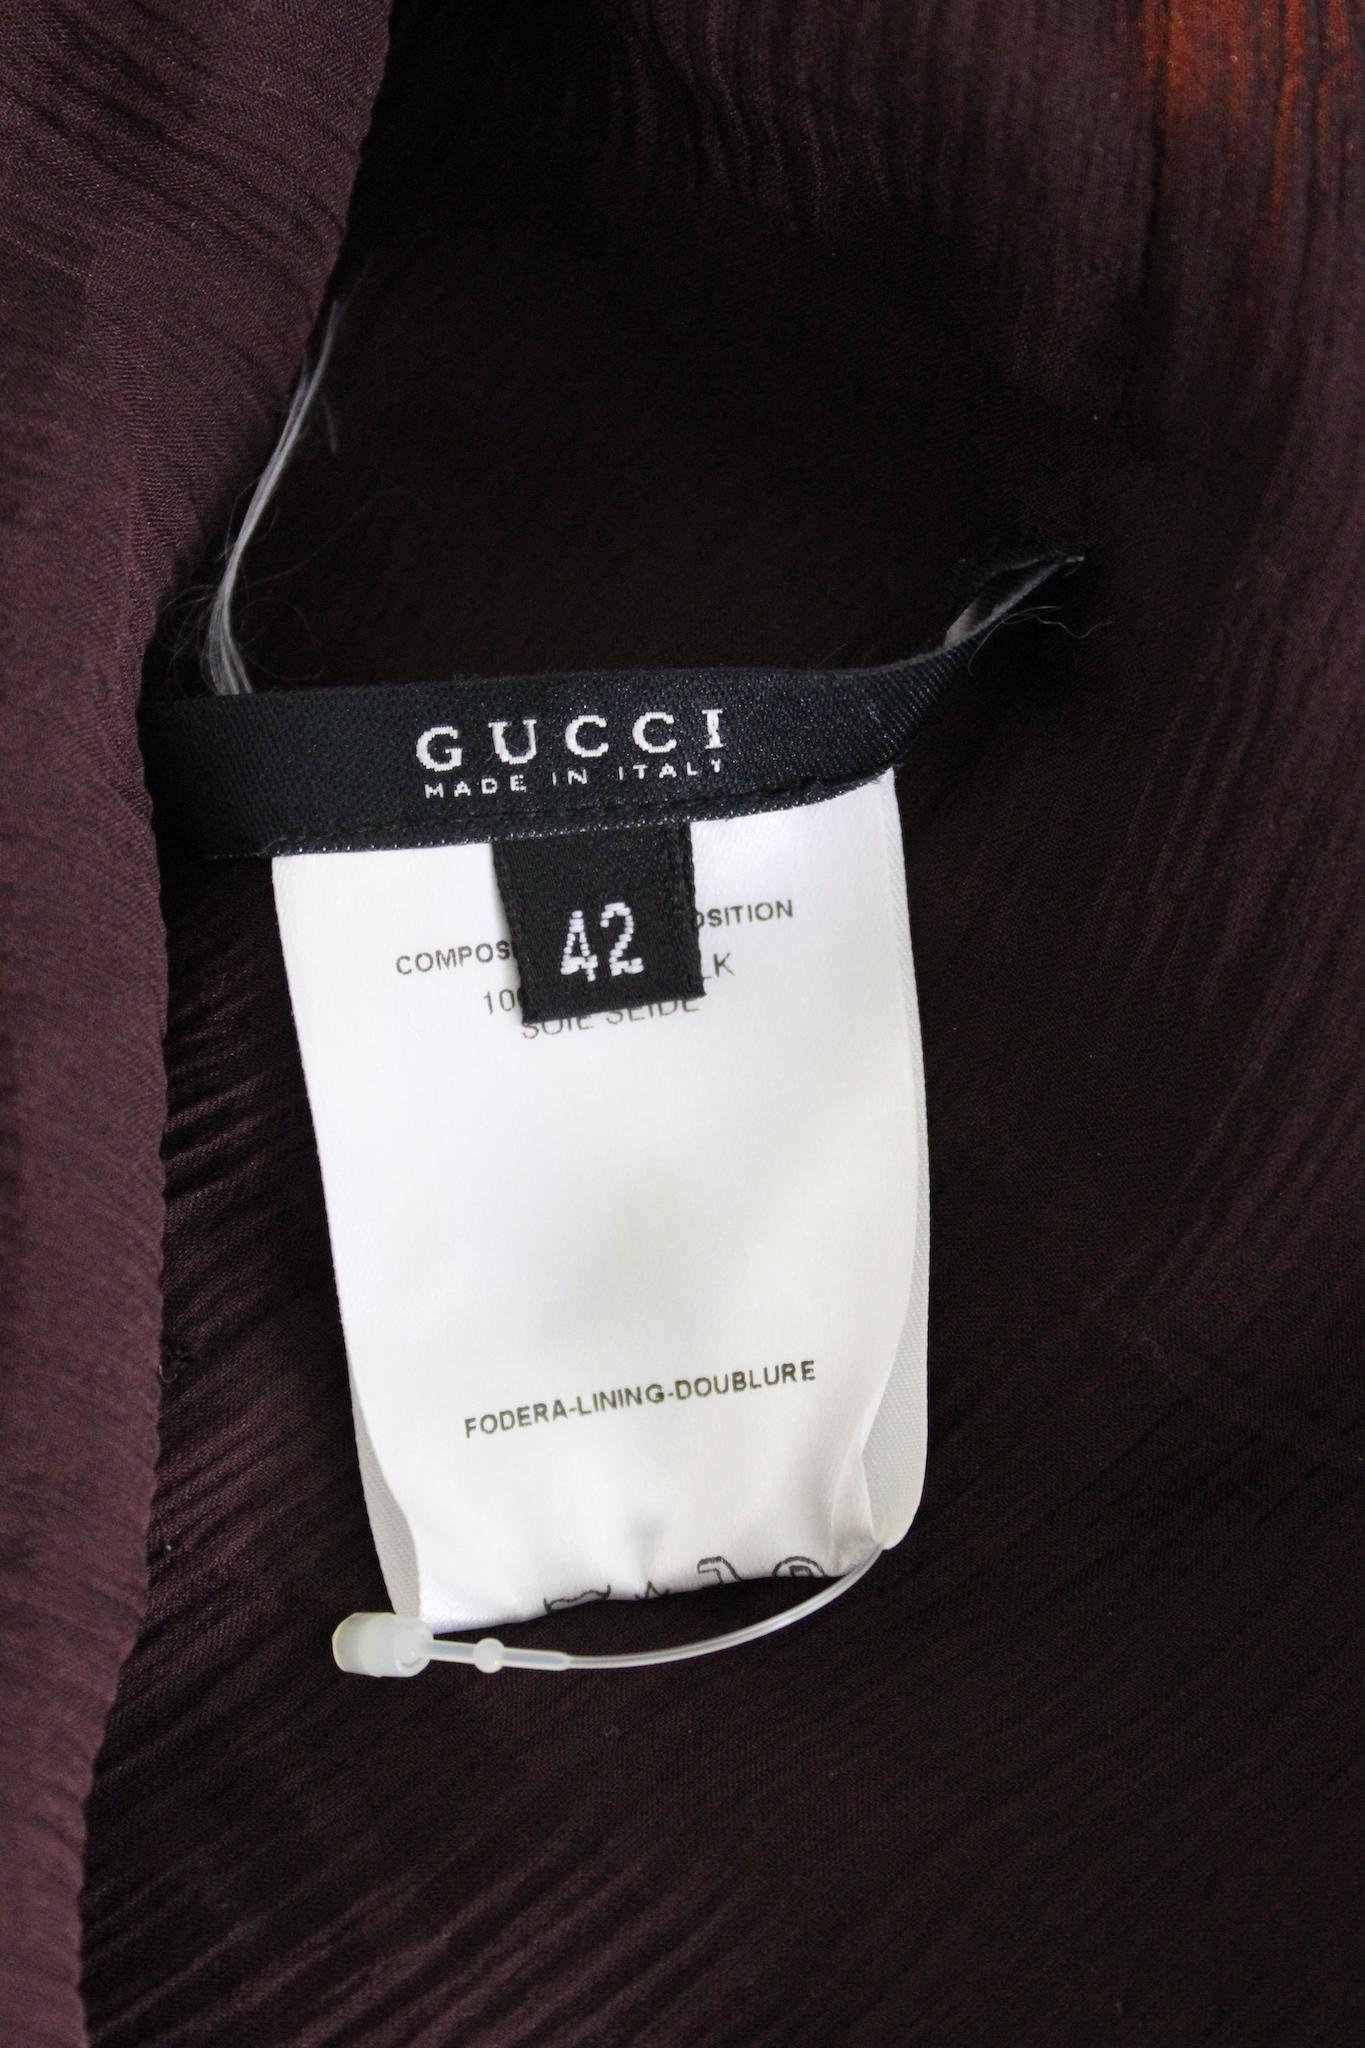 This Gucci shirt is from the 2000s and features a soft and transparent design. It is made from luxurious silk, which adds to its comfort and quality. The shirt comes in a brown color and features a v-neckline, making it a stylish and versatile